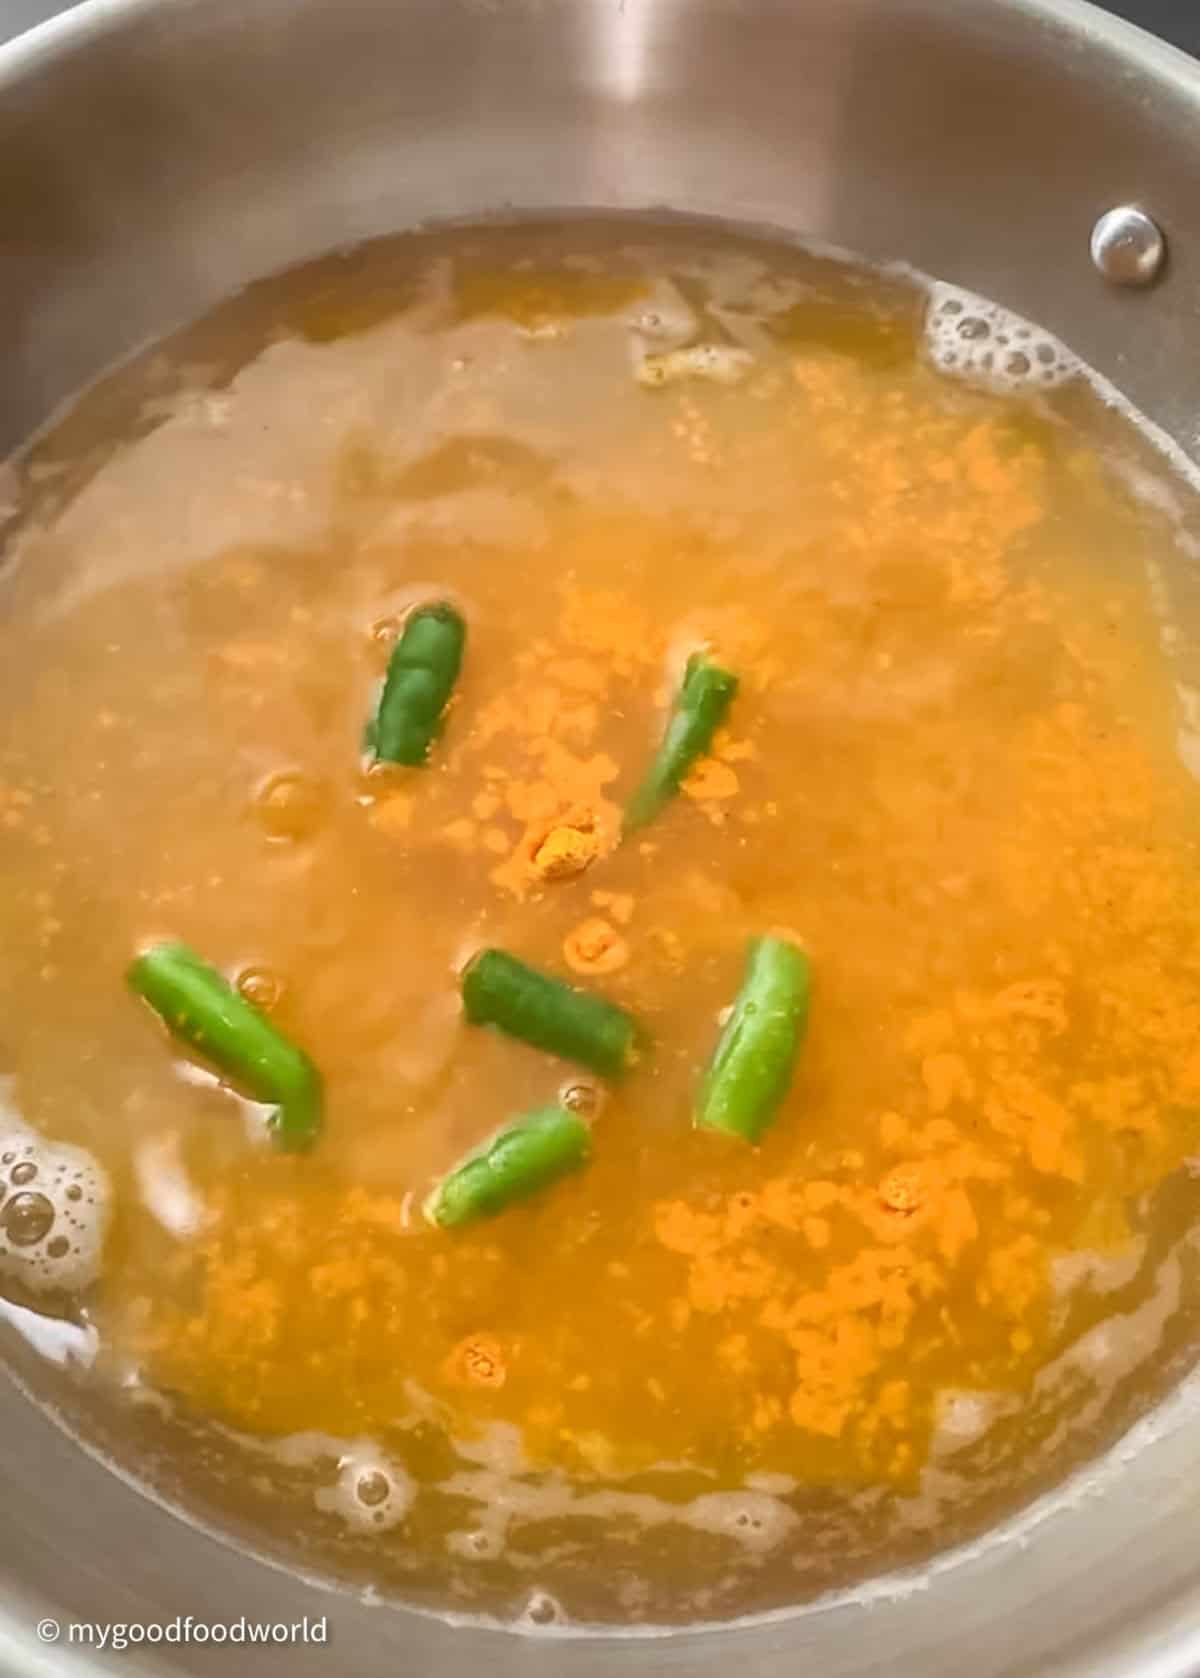 Some water with turmeric and chopped green chili peppers is cooking in a steel wok.